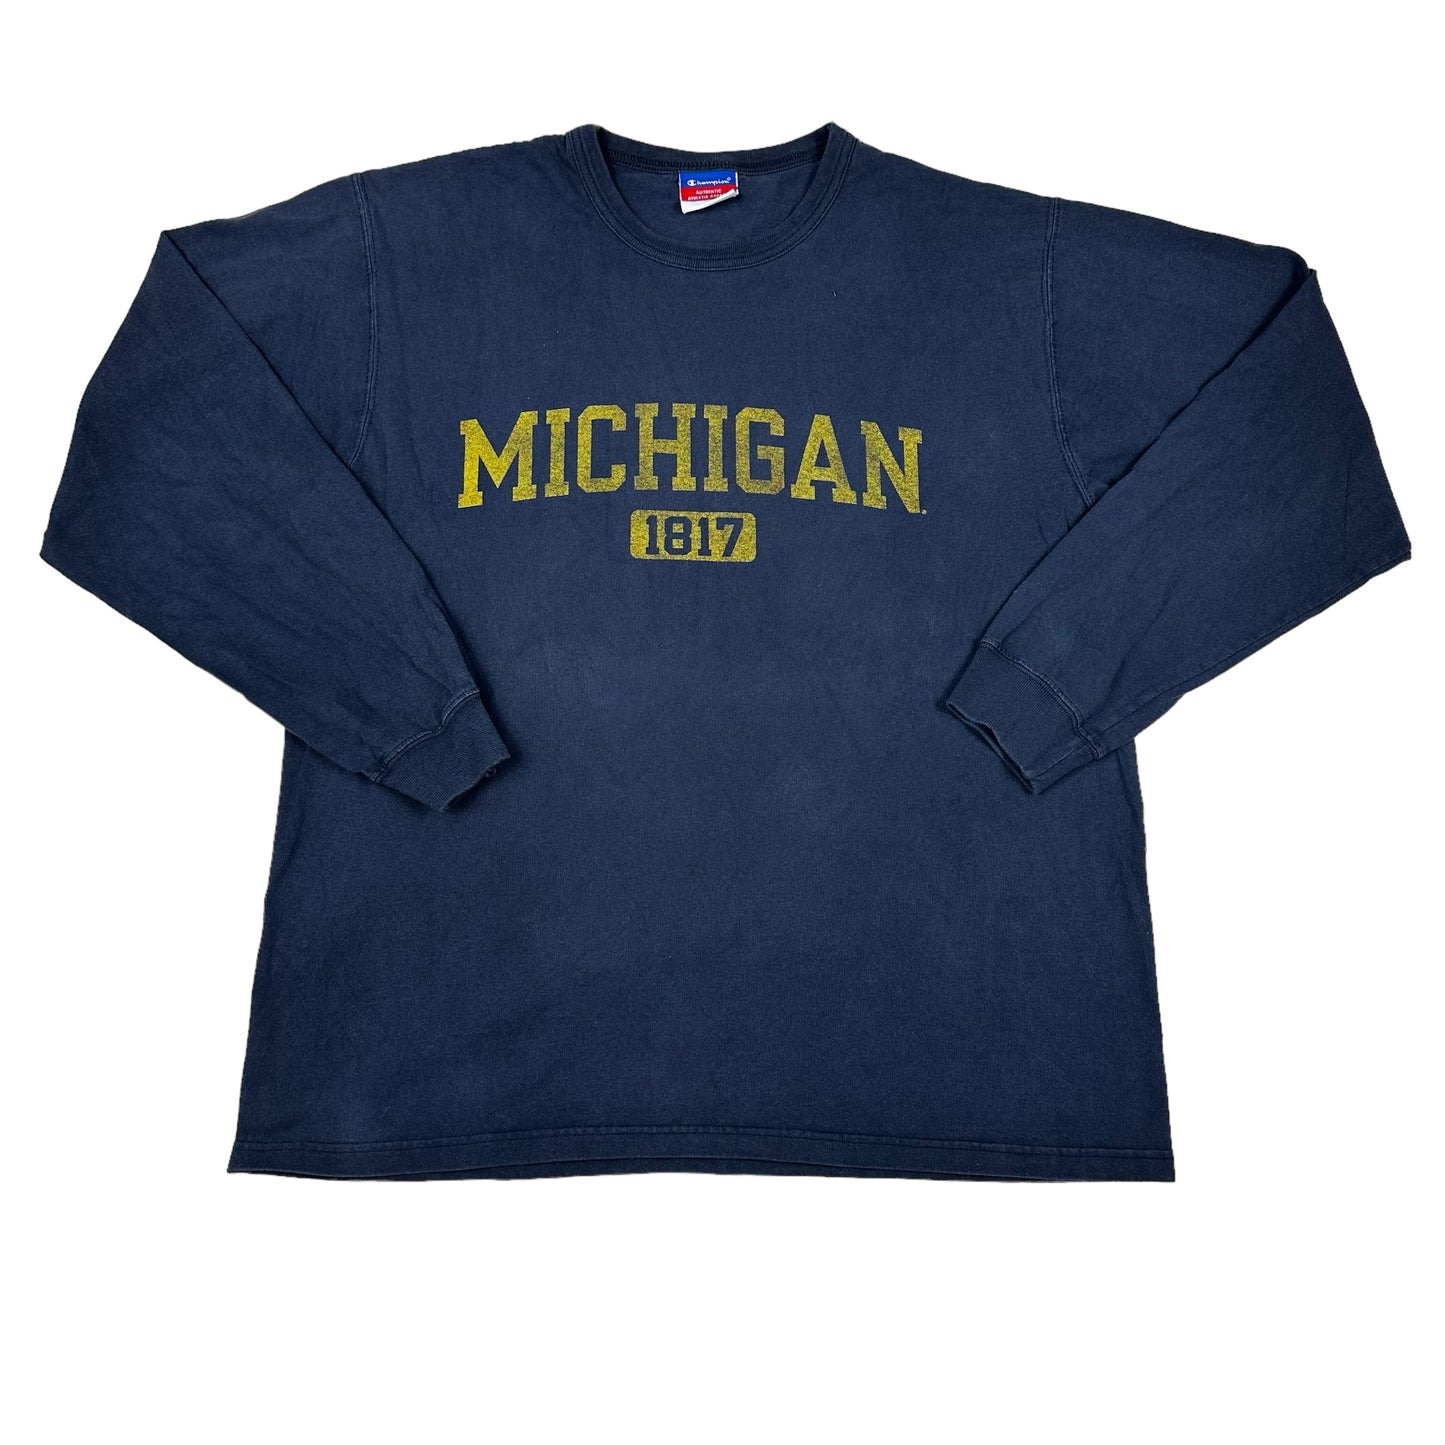 University of Michigan Navy Blue Chmpion Lone. Seeve Tee